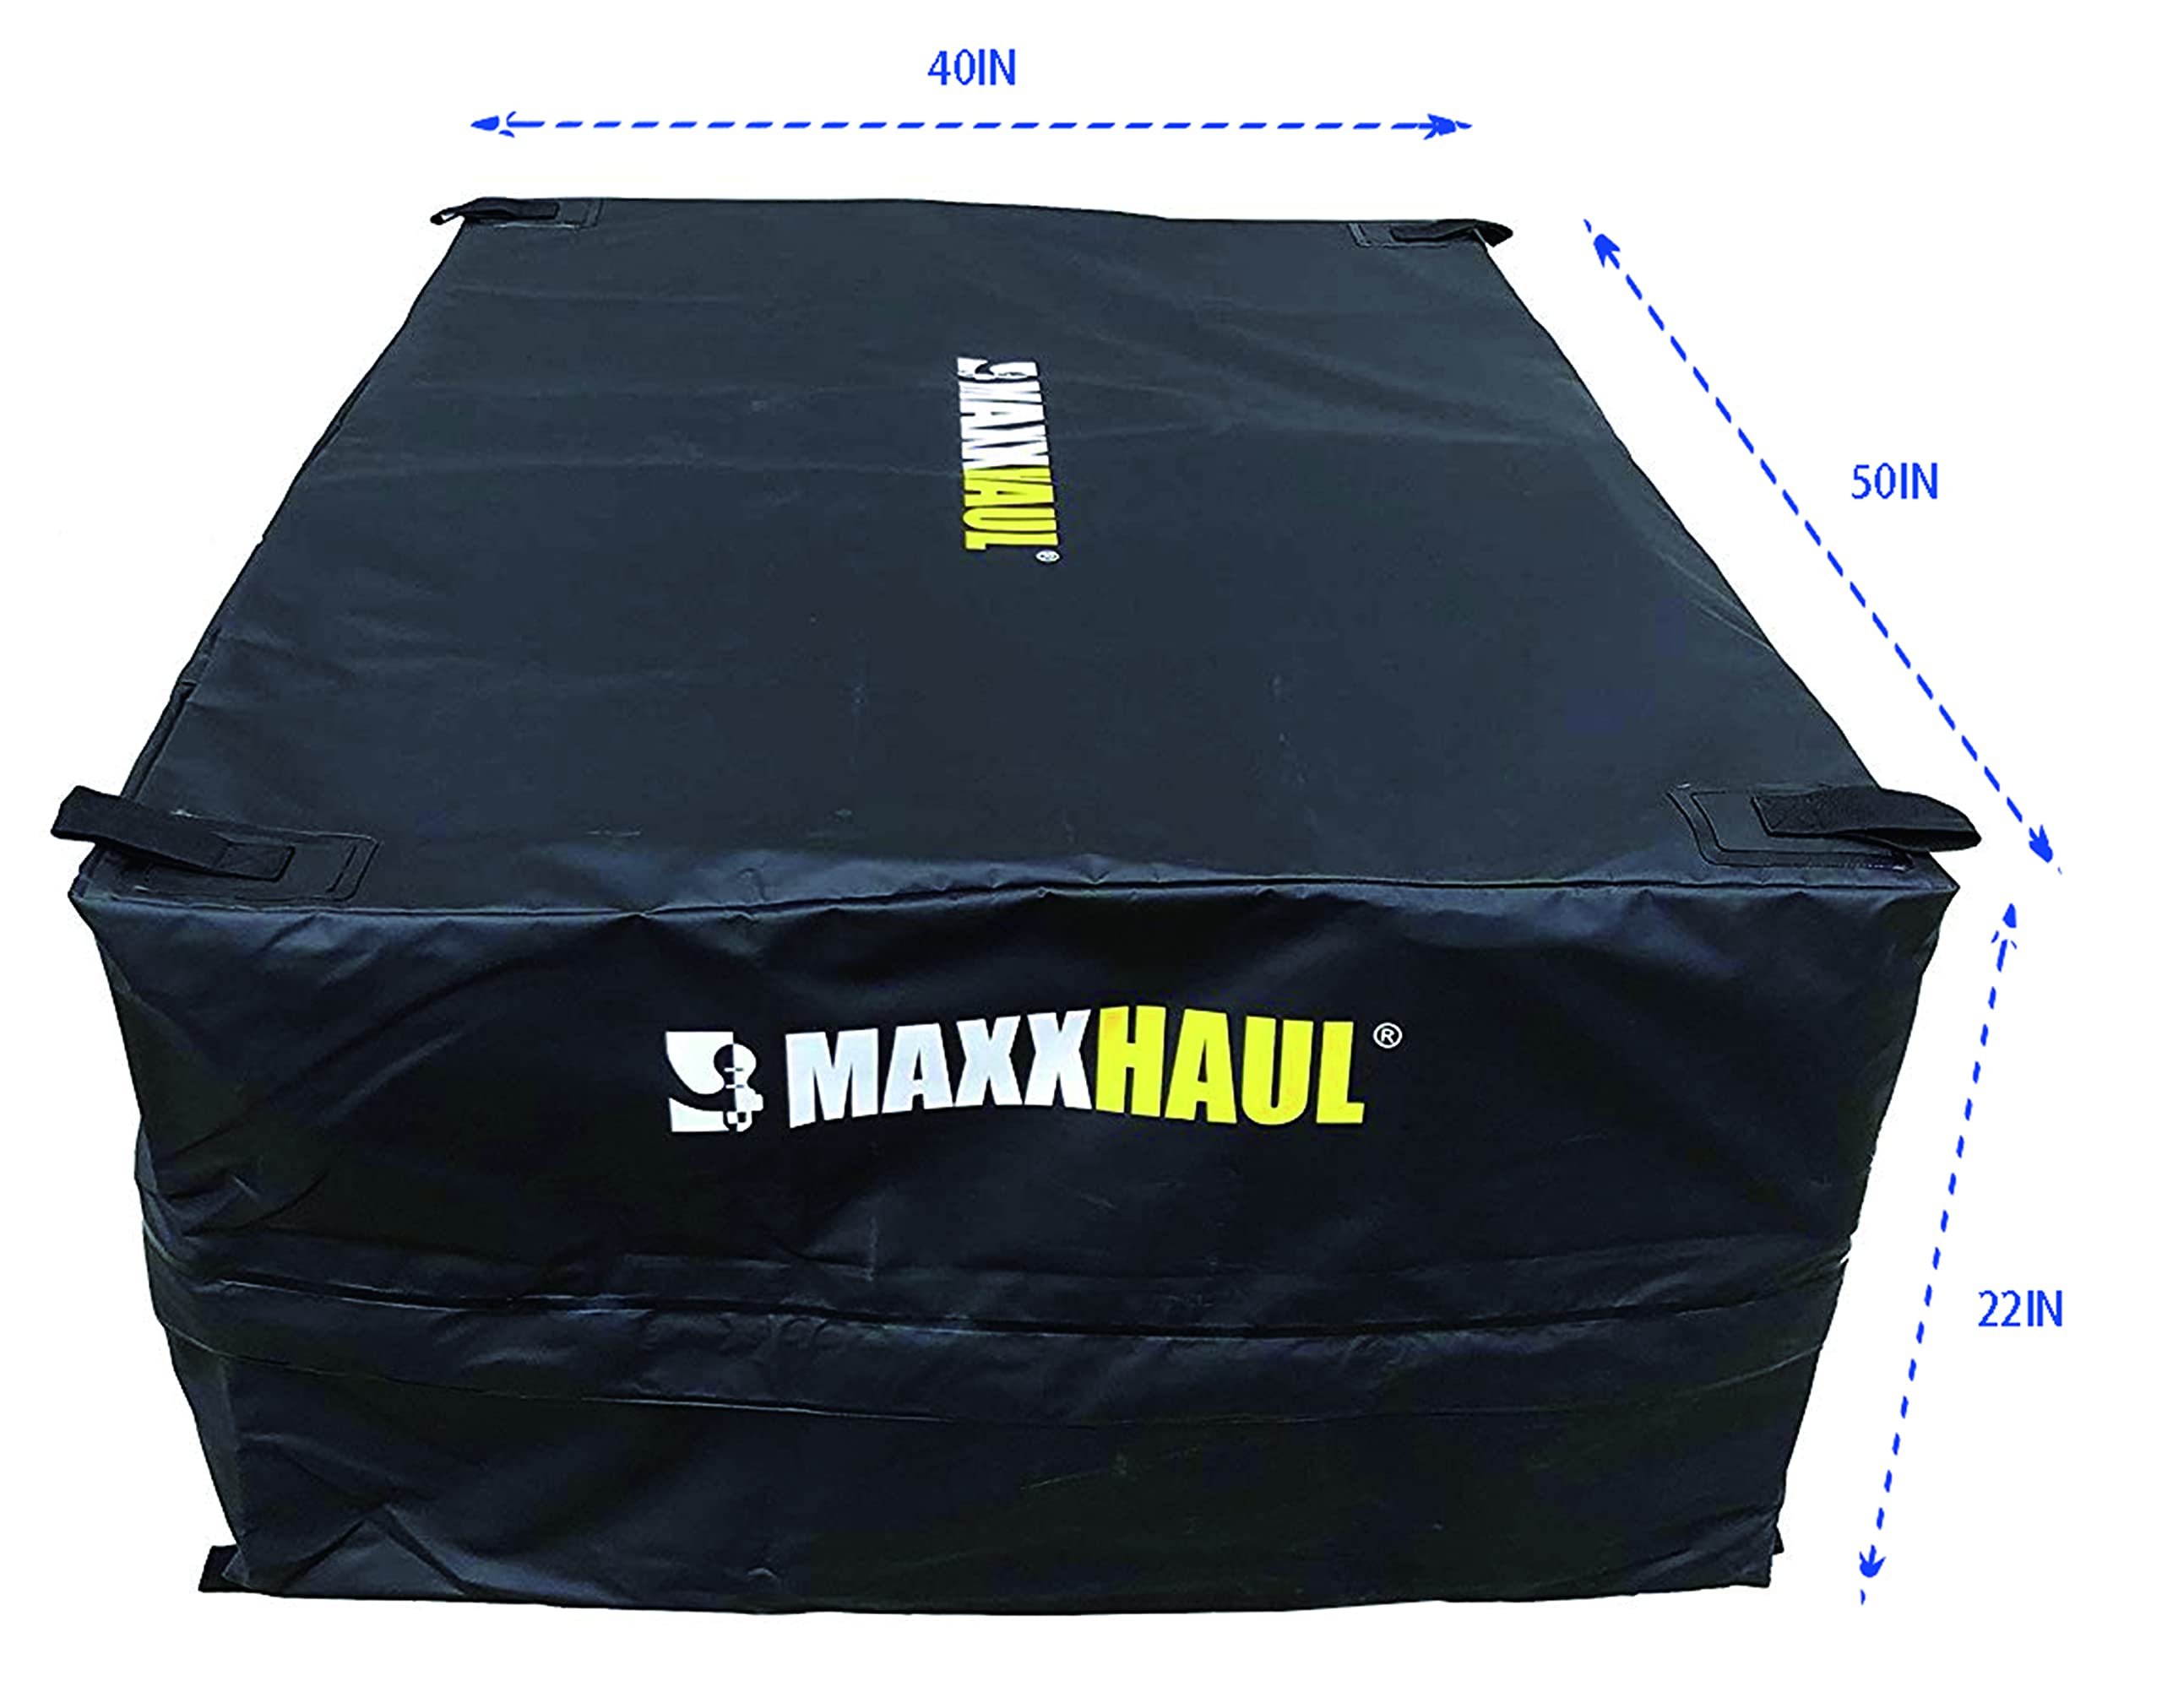 MaxxHaul 50130 Cargo Truck Bag - Heavy Duty and Water Resistant for Pick Up Truck or SUV's - 50" x 40" x 22" Black